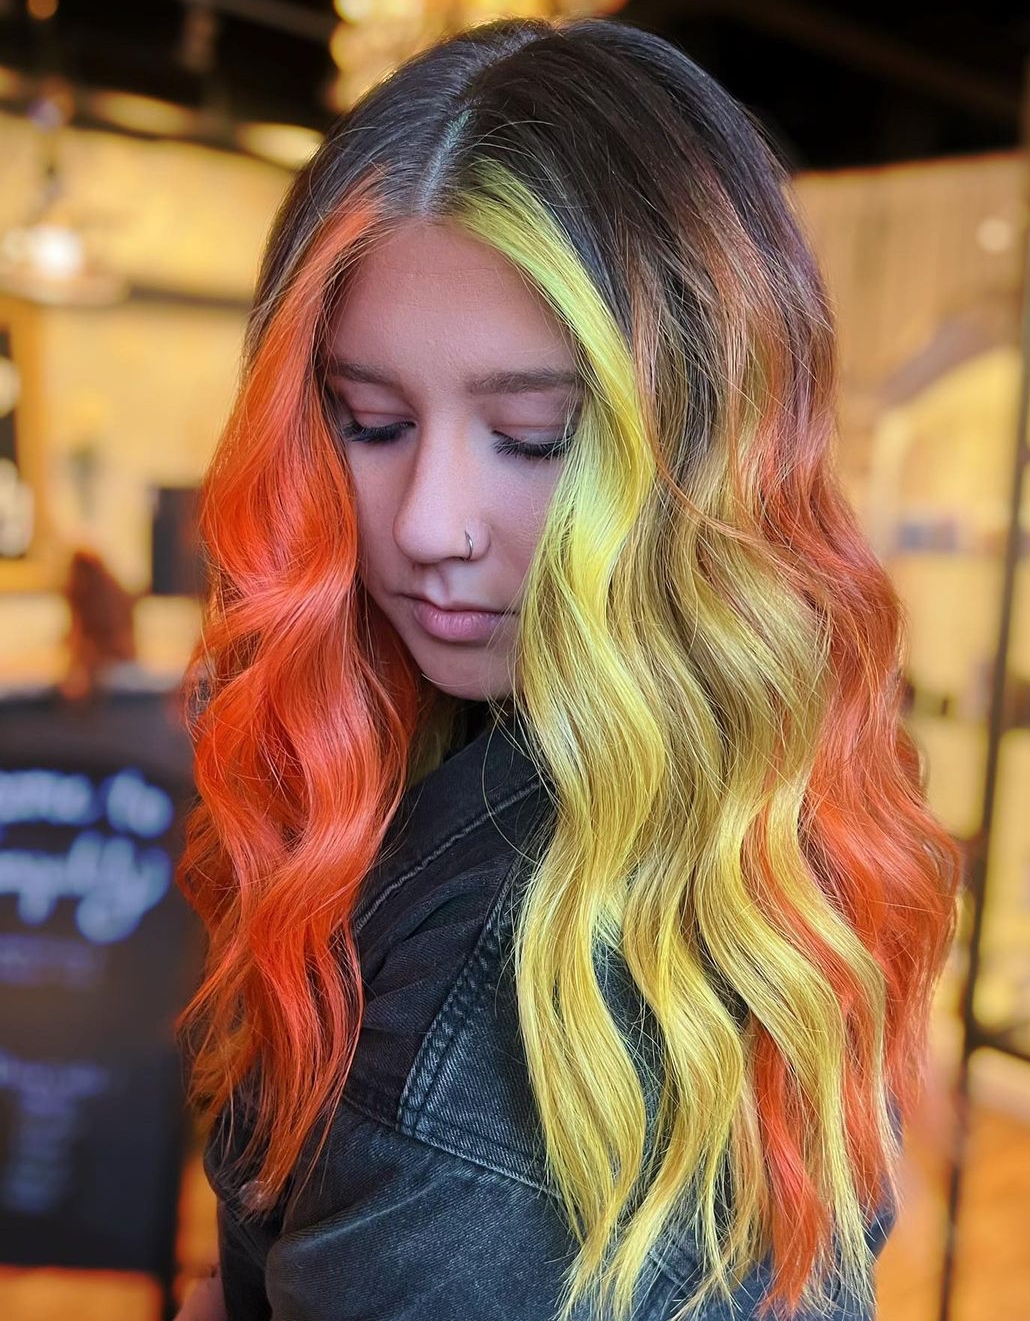 Black Straight Hair with Orange and Yellow Highlights